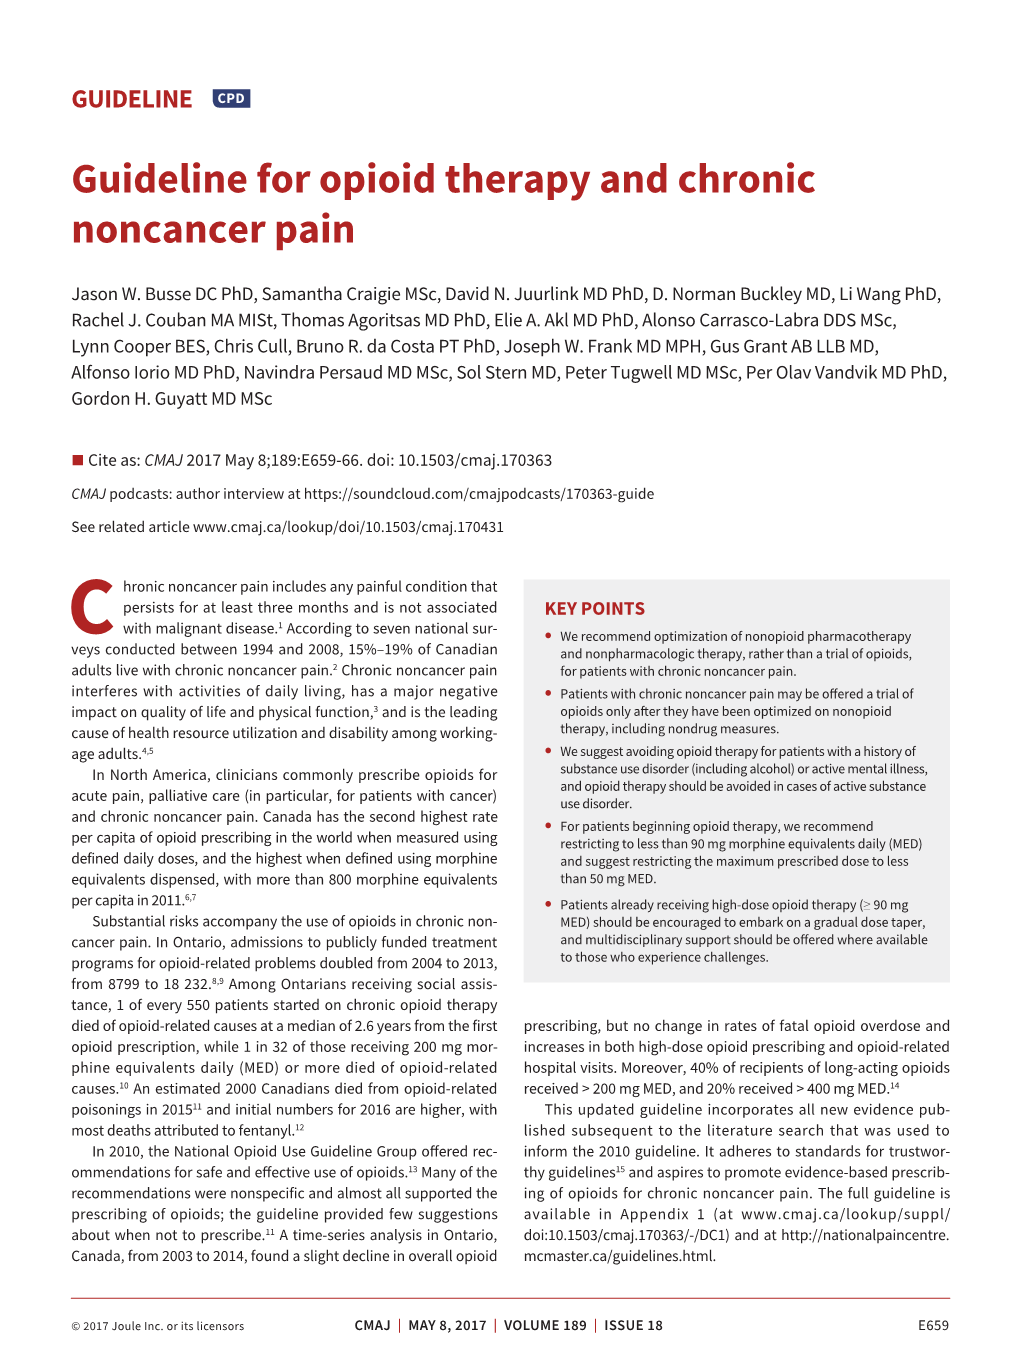 Guideline for Opioid Therapy and Chronic Noncancer Pain